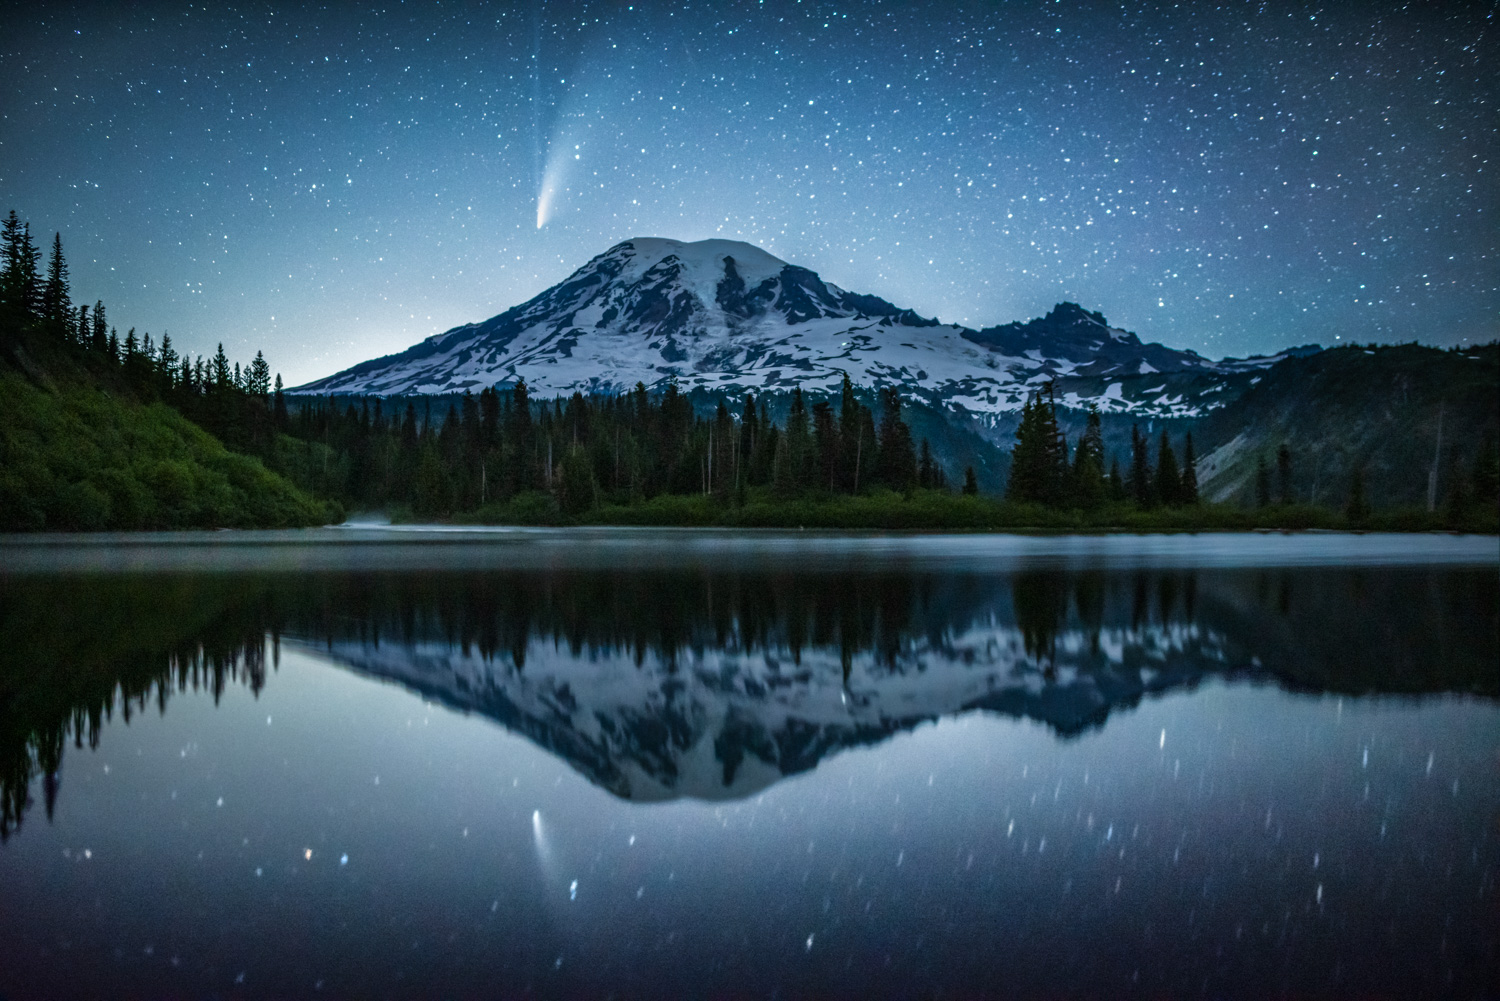 Comet NEOWISE over Mount Rainier and reflected in Bench Lake.